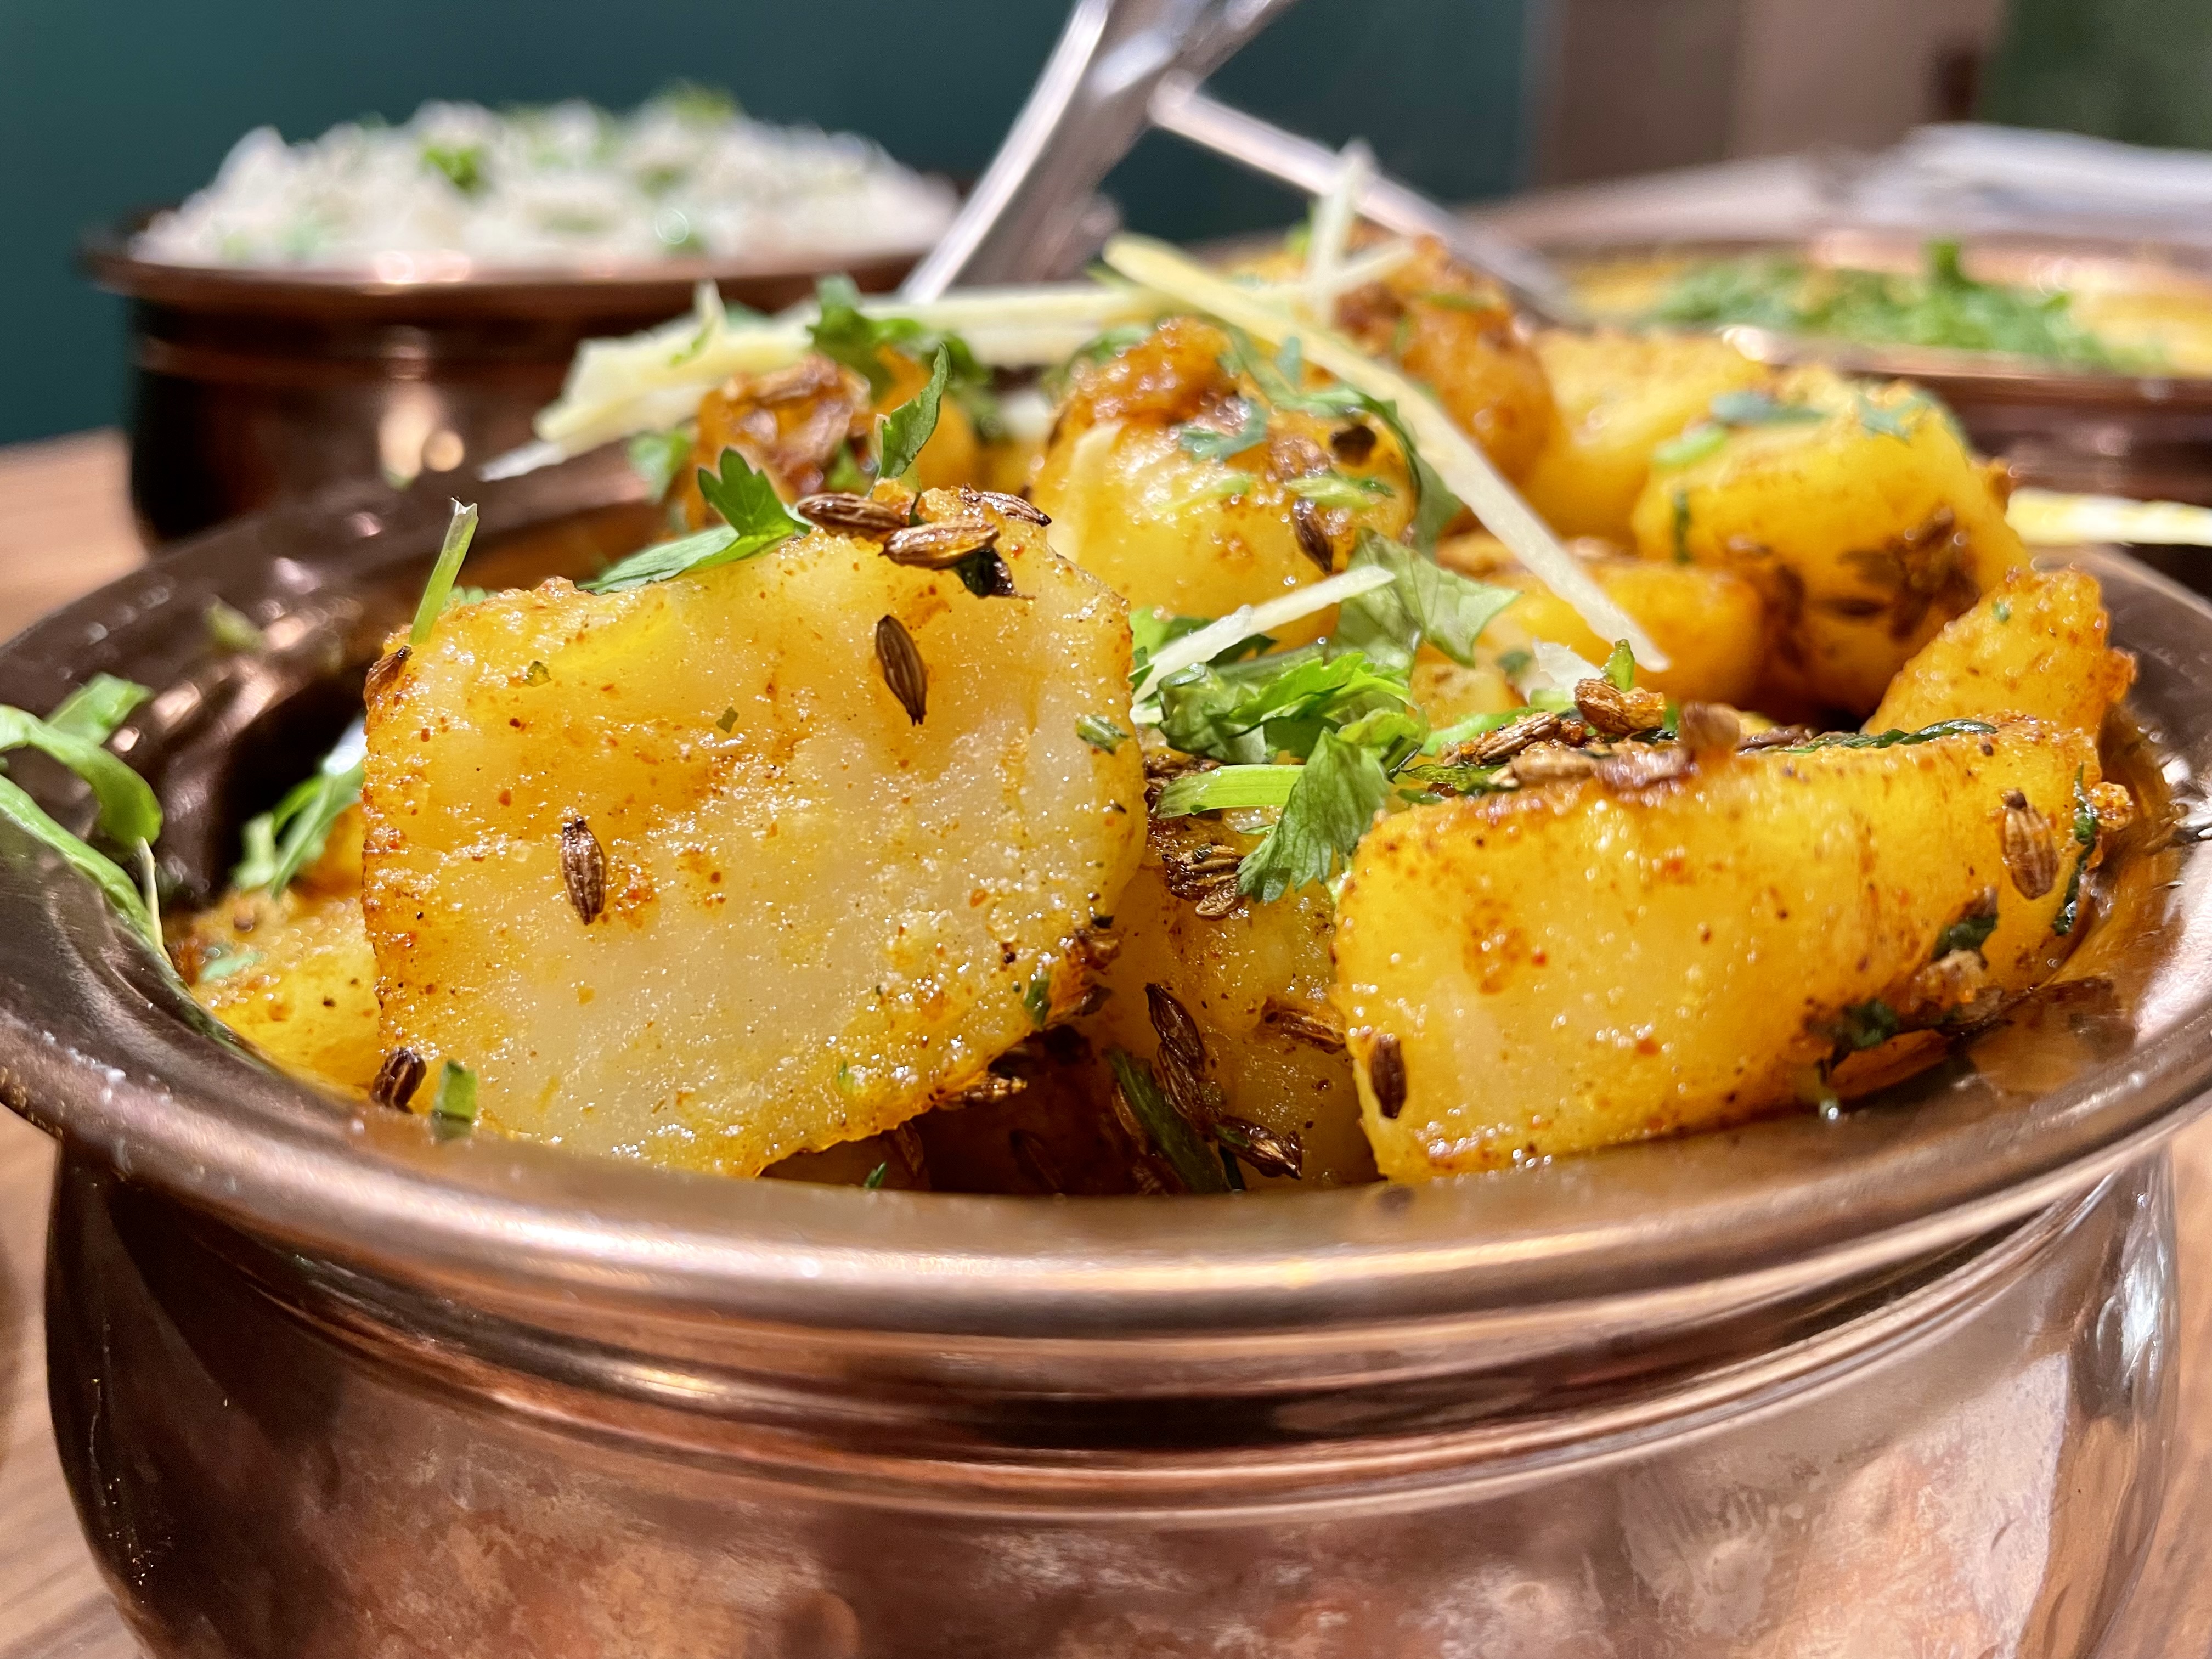 Jeera aloo is a typical vegetarian Indian dish which is often served as a side dish and pairs well with roti or rice